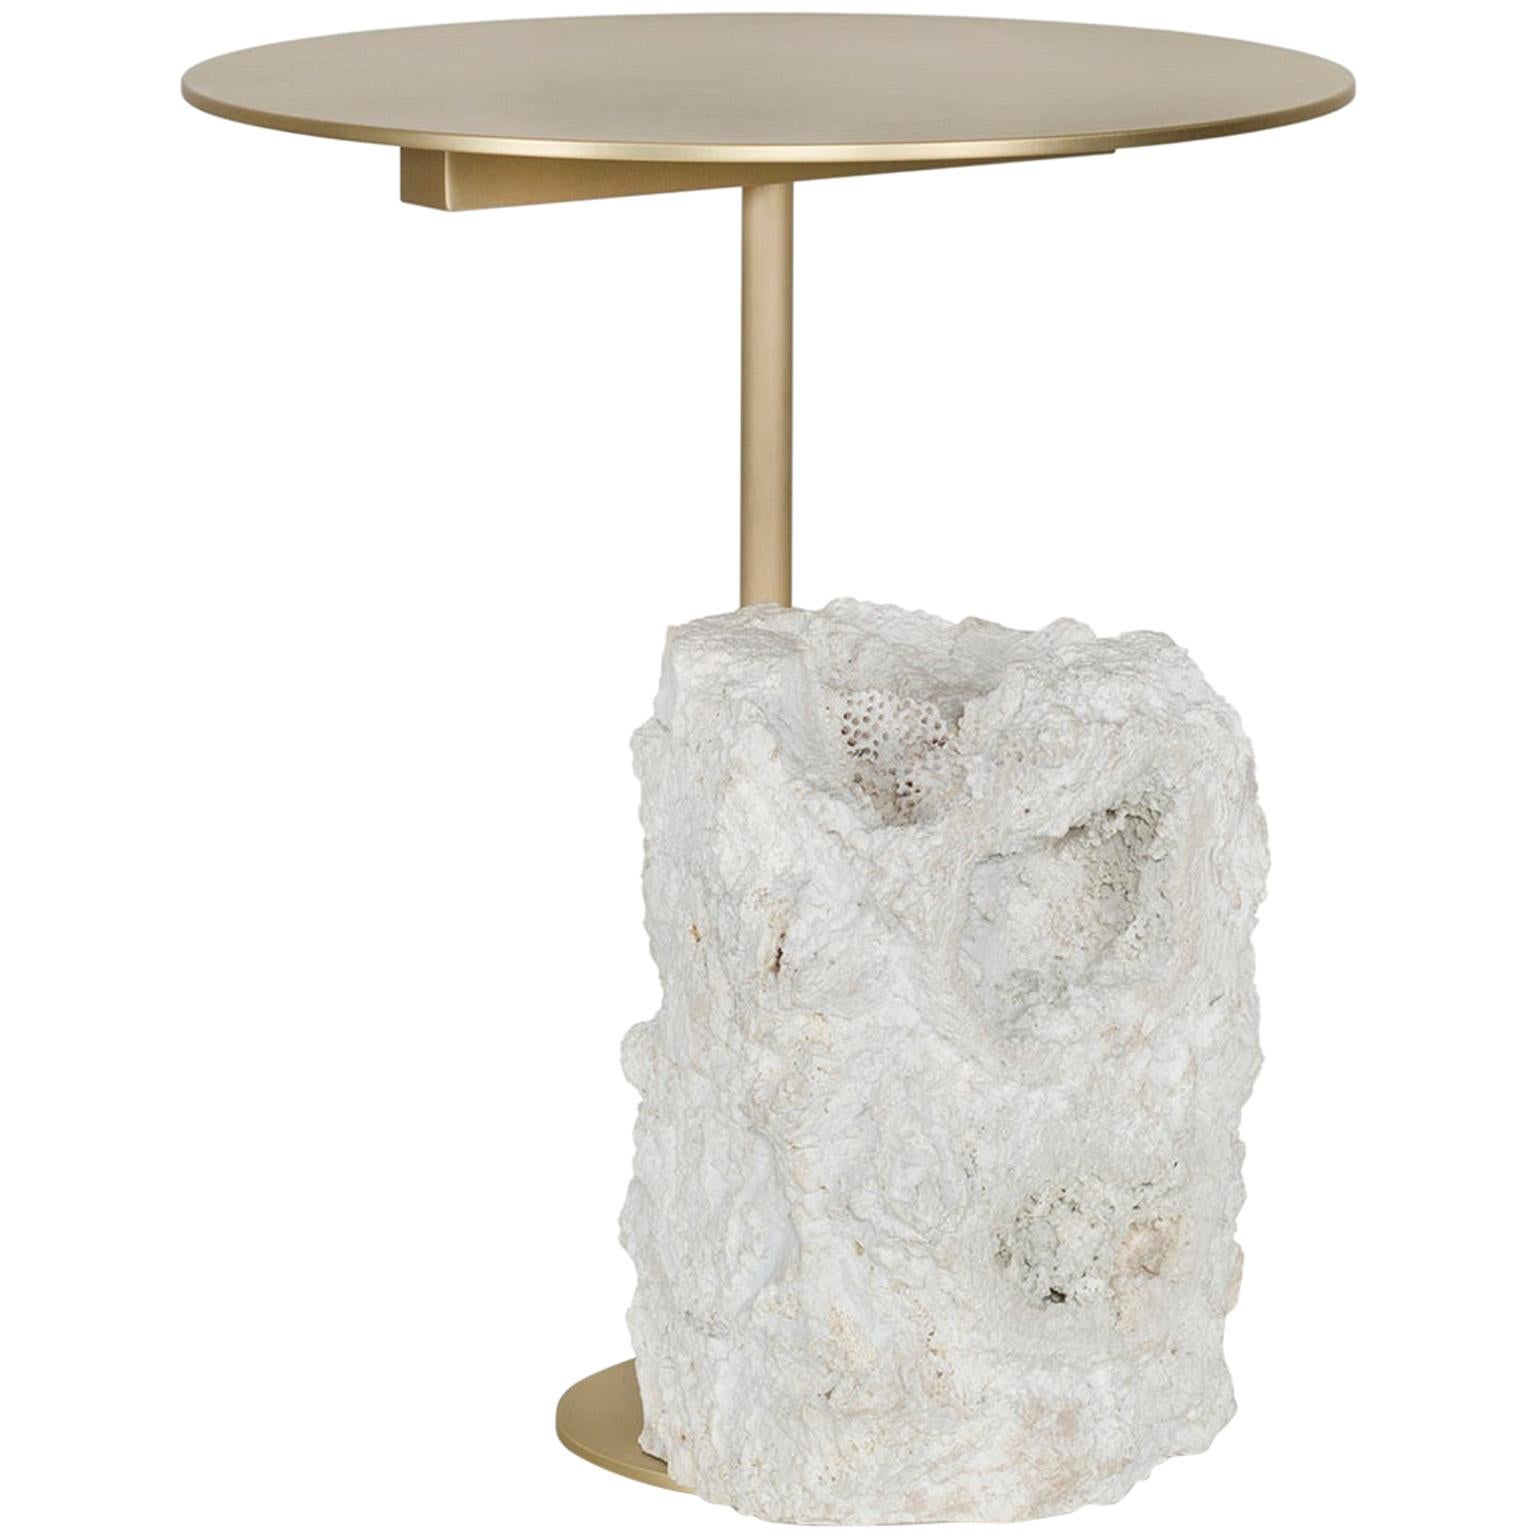 Greenapple Side Table, Pico Side Table, Coral Color Stone, Handmade in Portugal